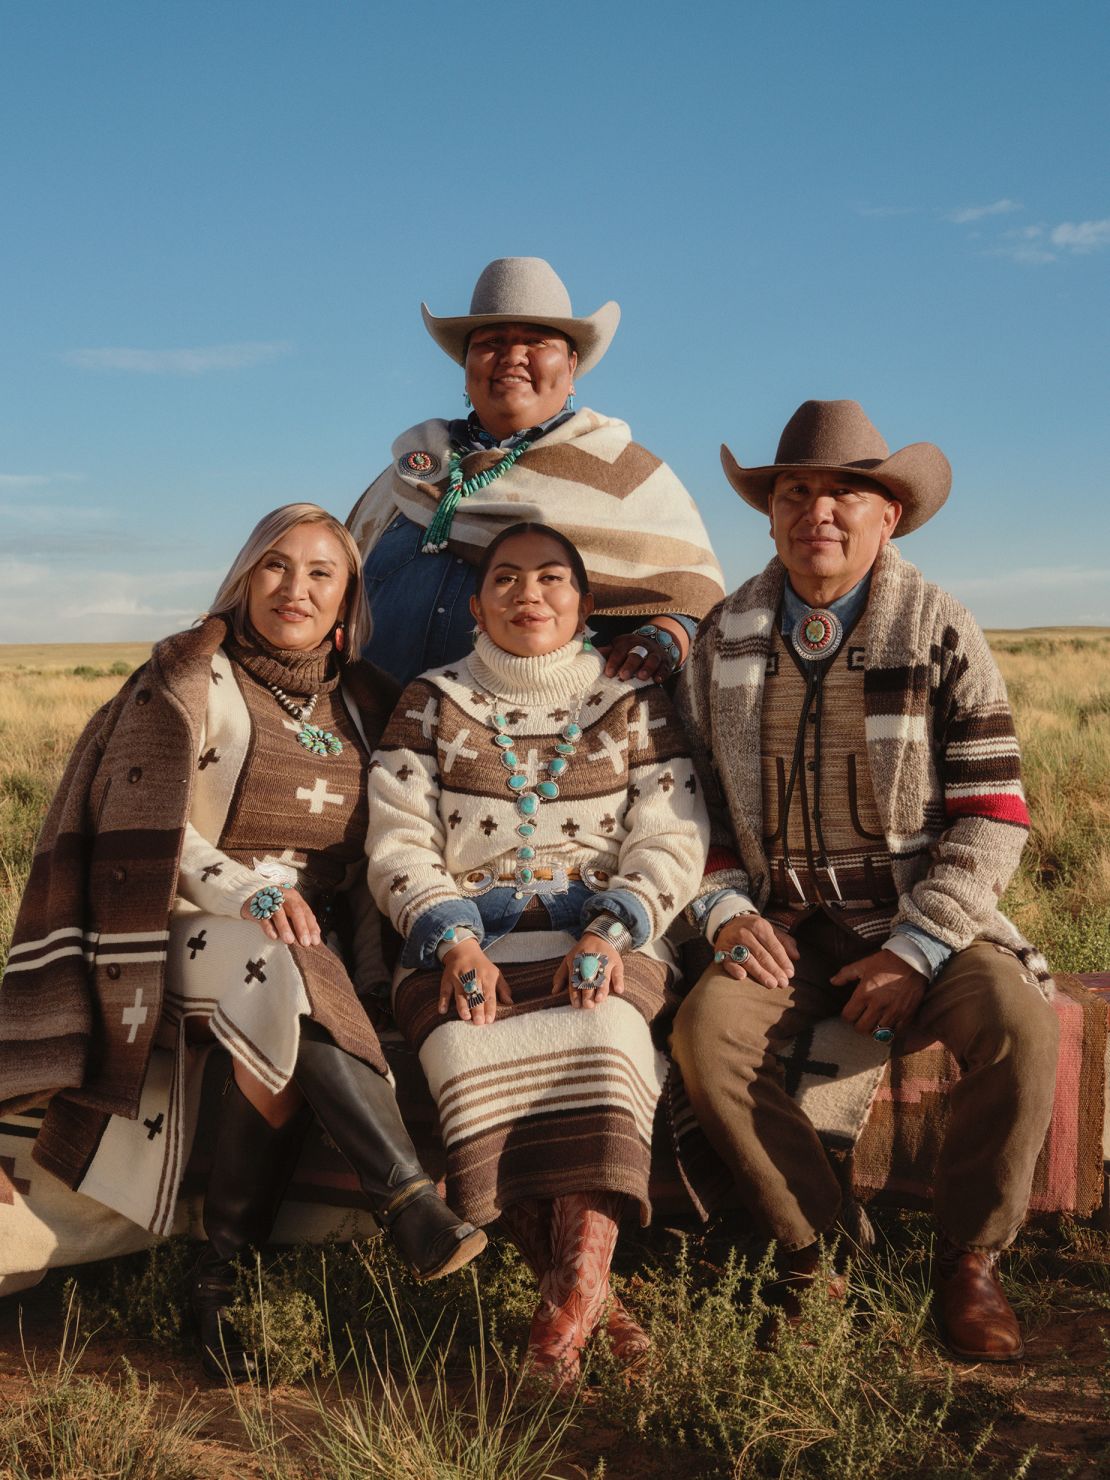 The Glasses family, pictured as part of Ralph Lauren's campaign imagery.